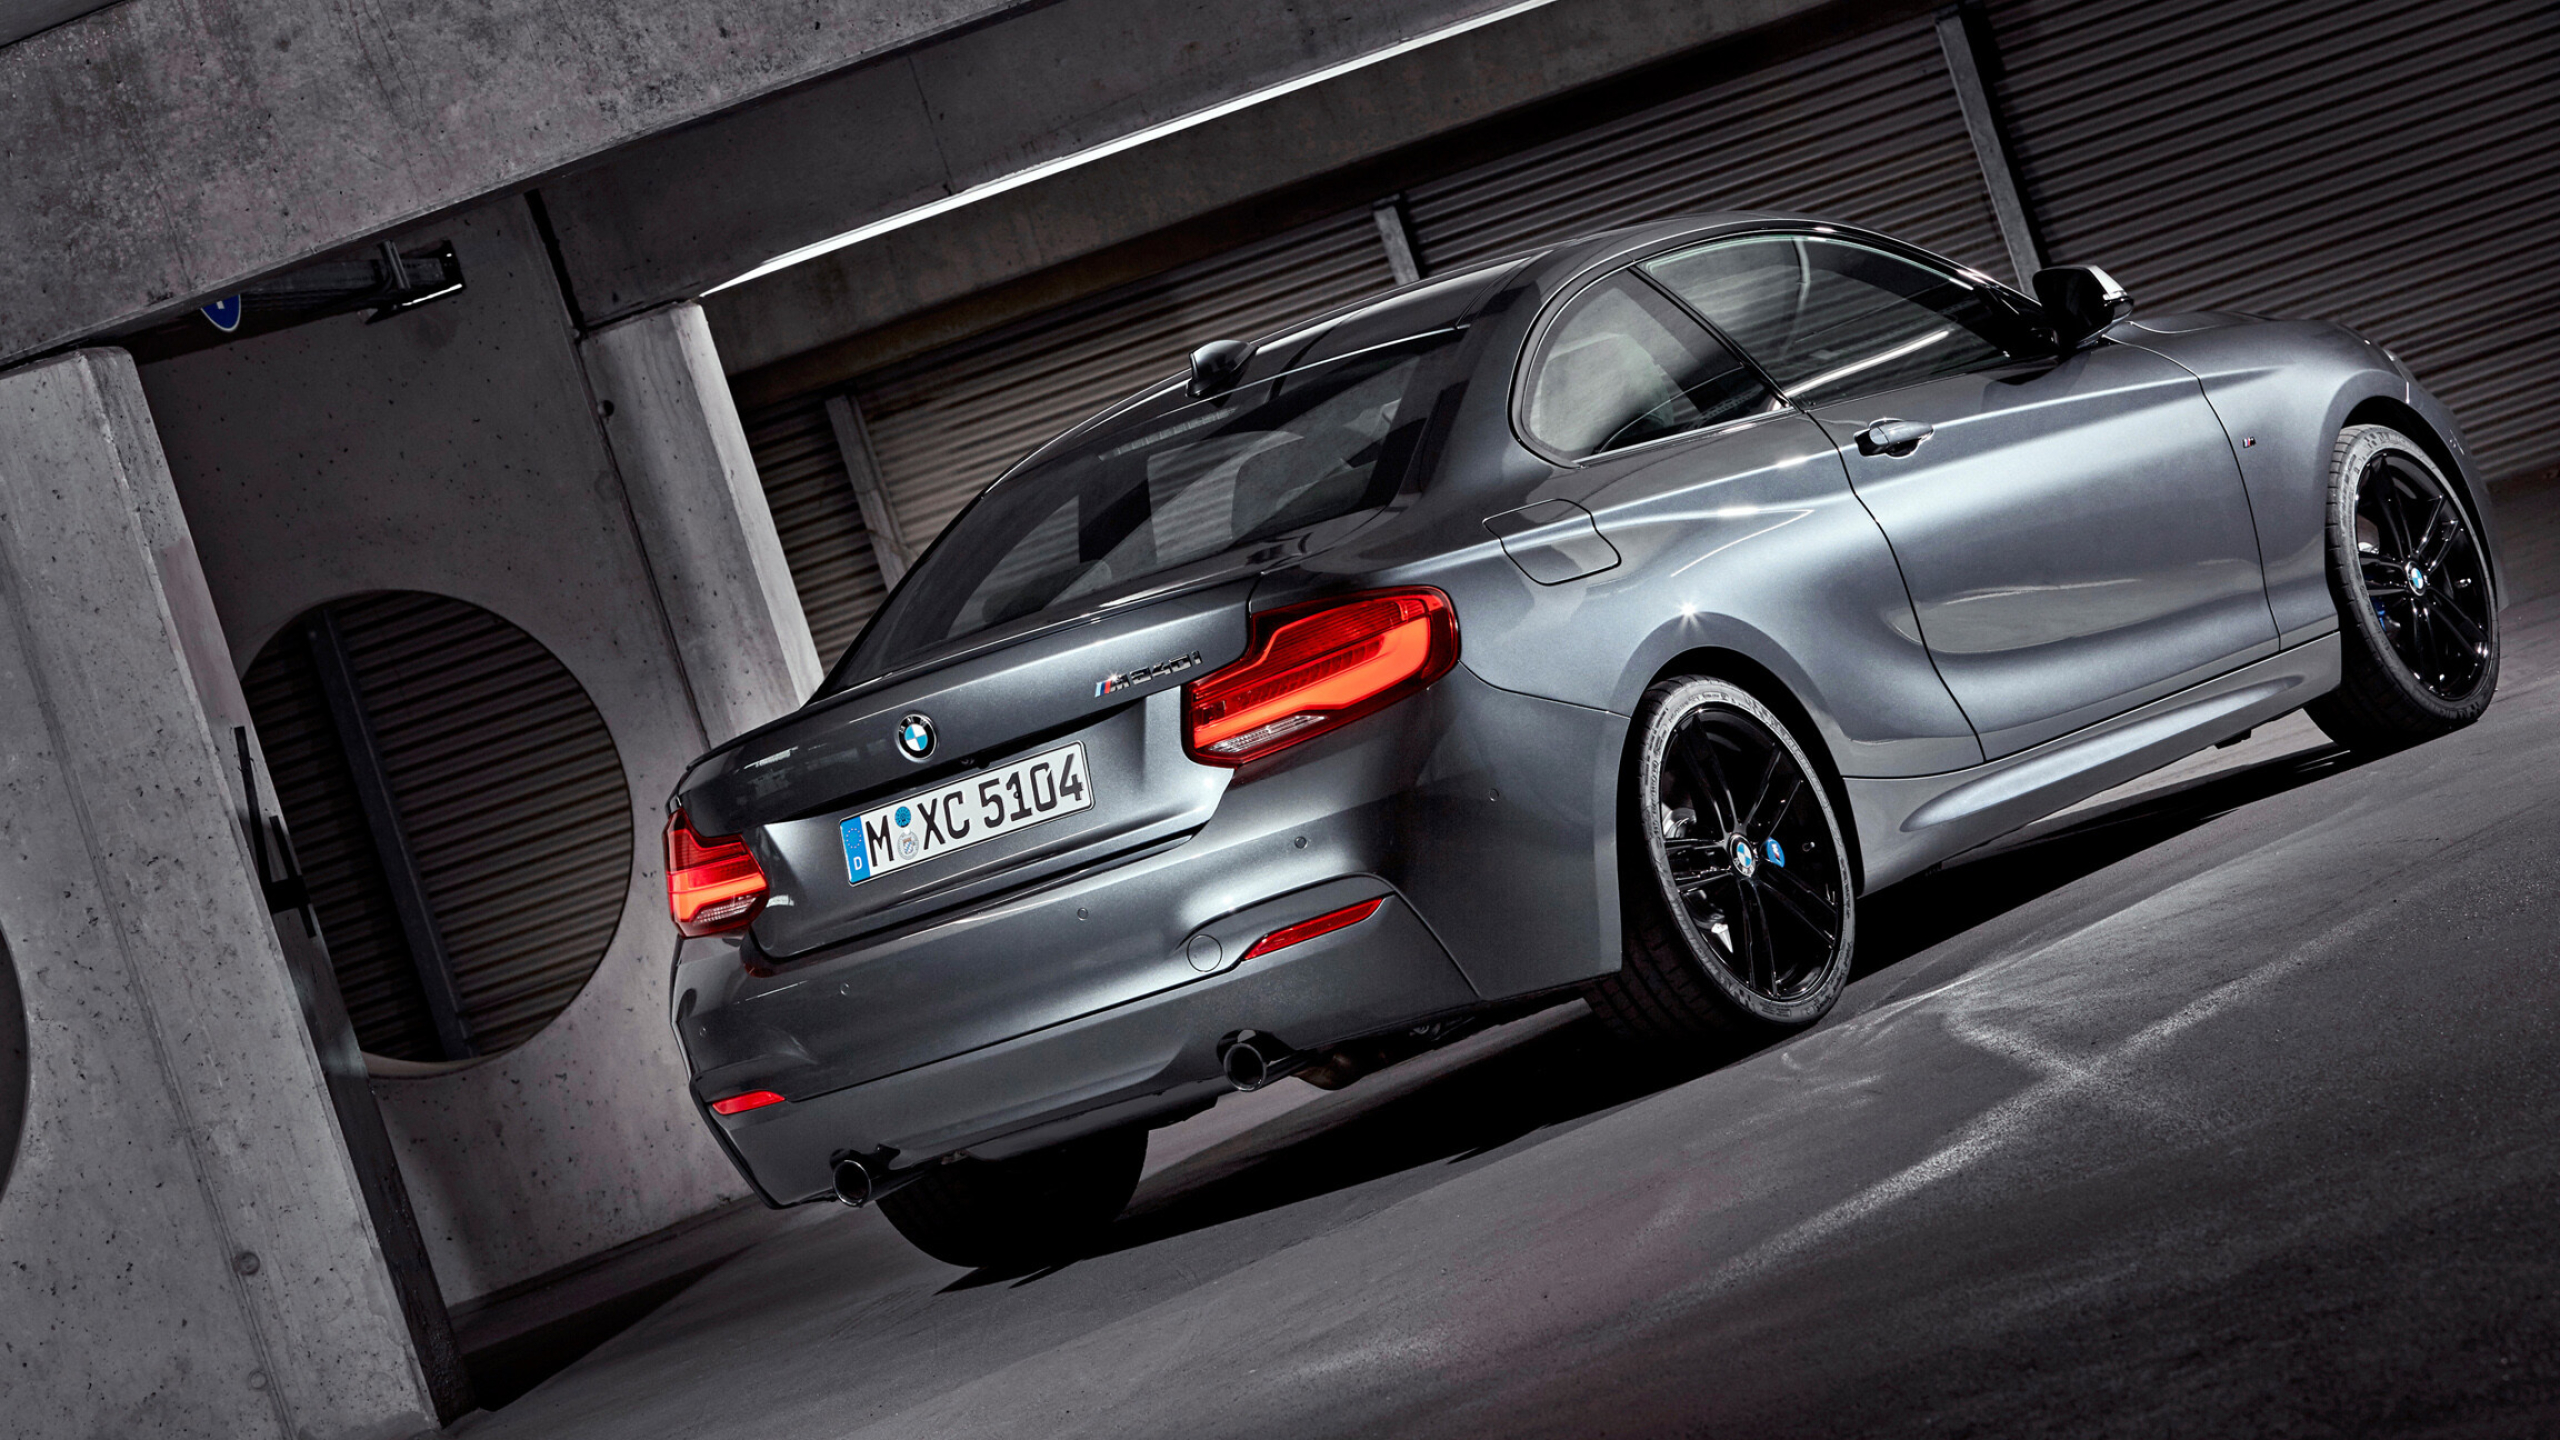 BMW 2 Series: Automaker, Headquartered in Munich, 230i, Coupe. 2560x1440 HD Wallpaper.